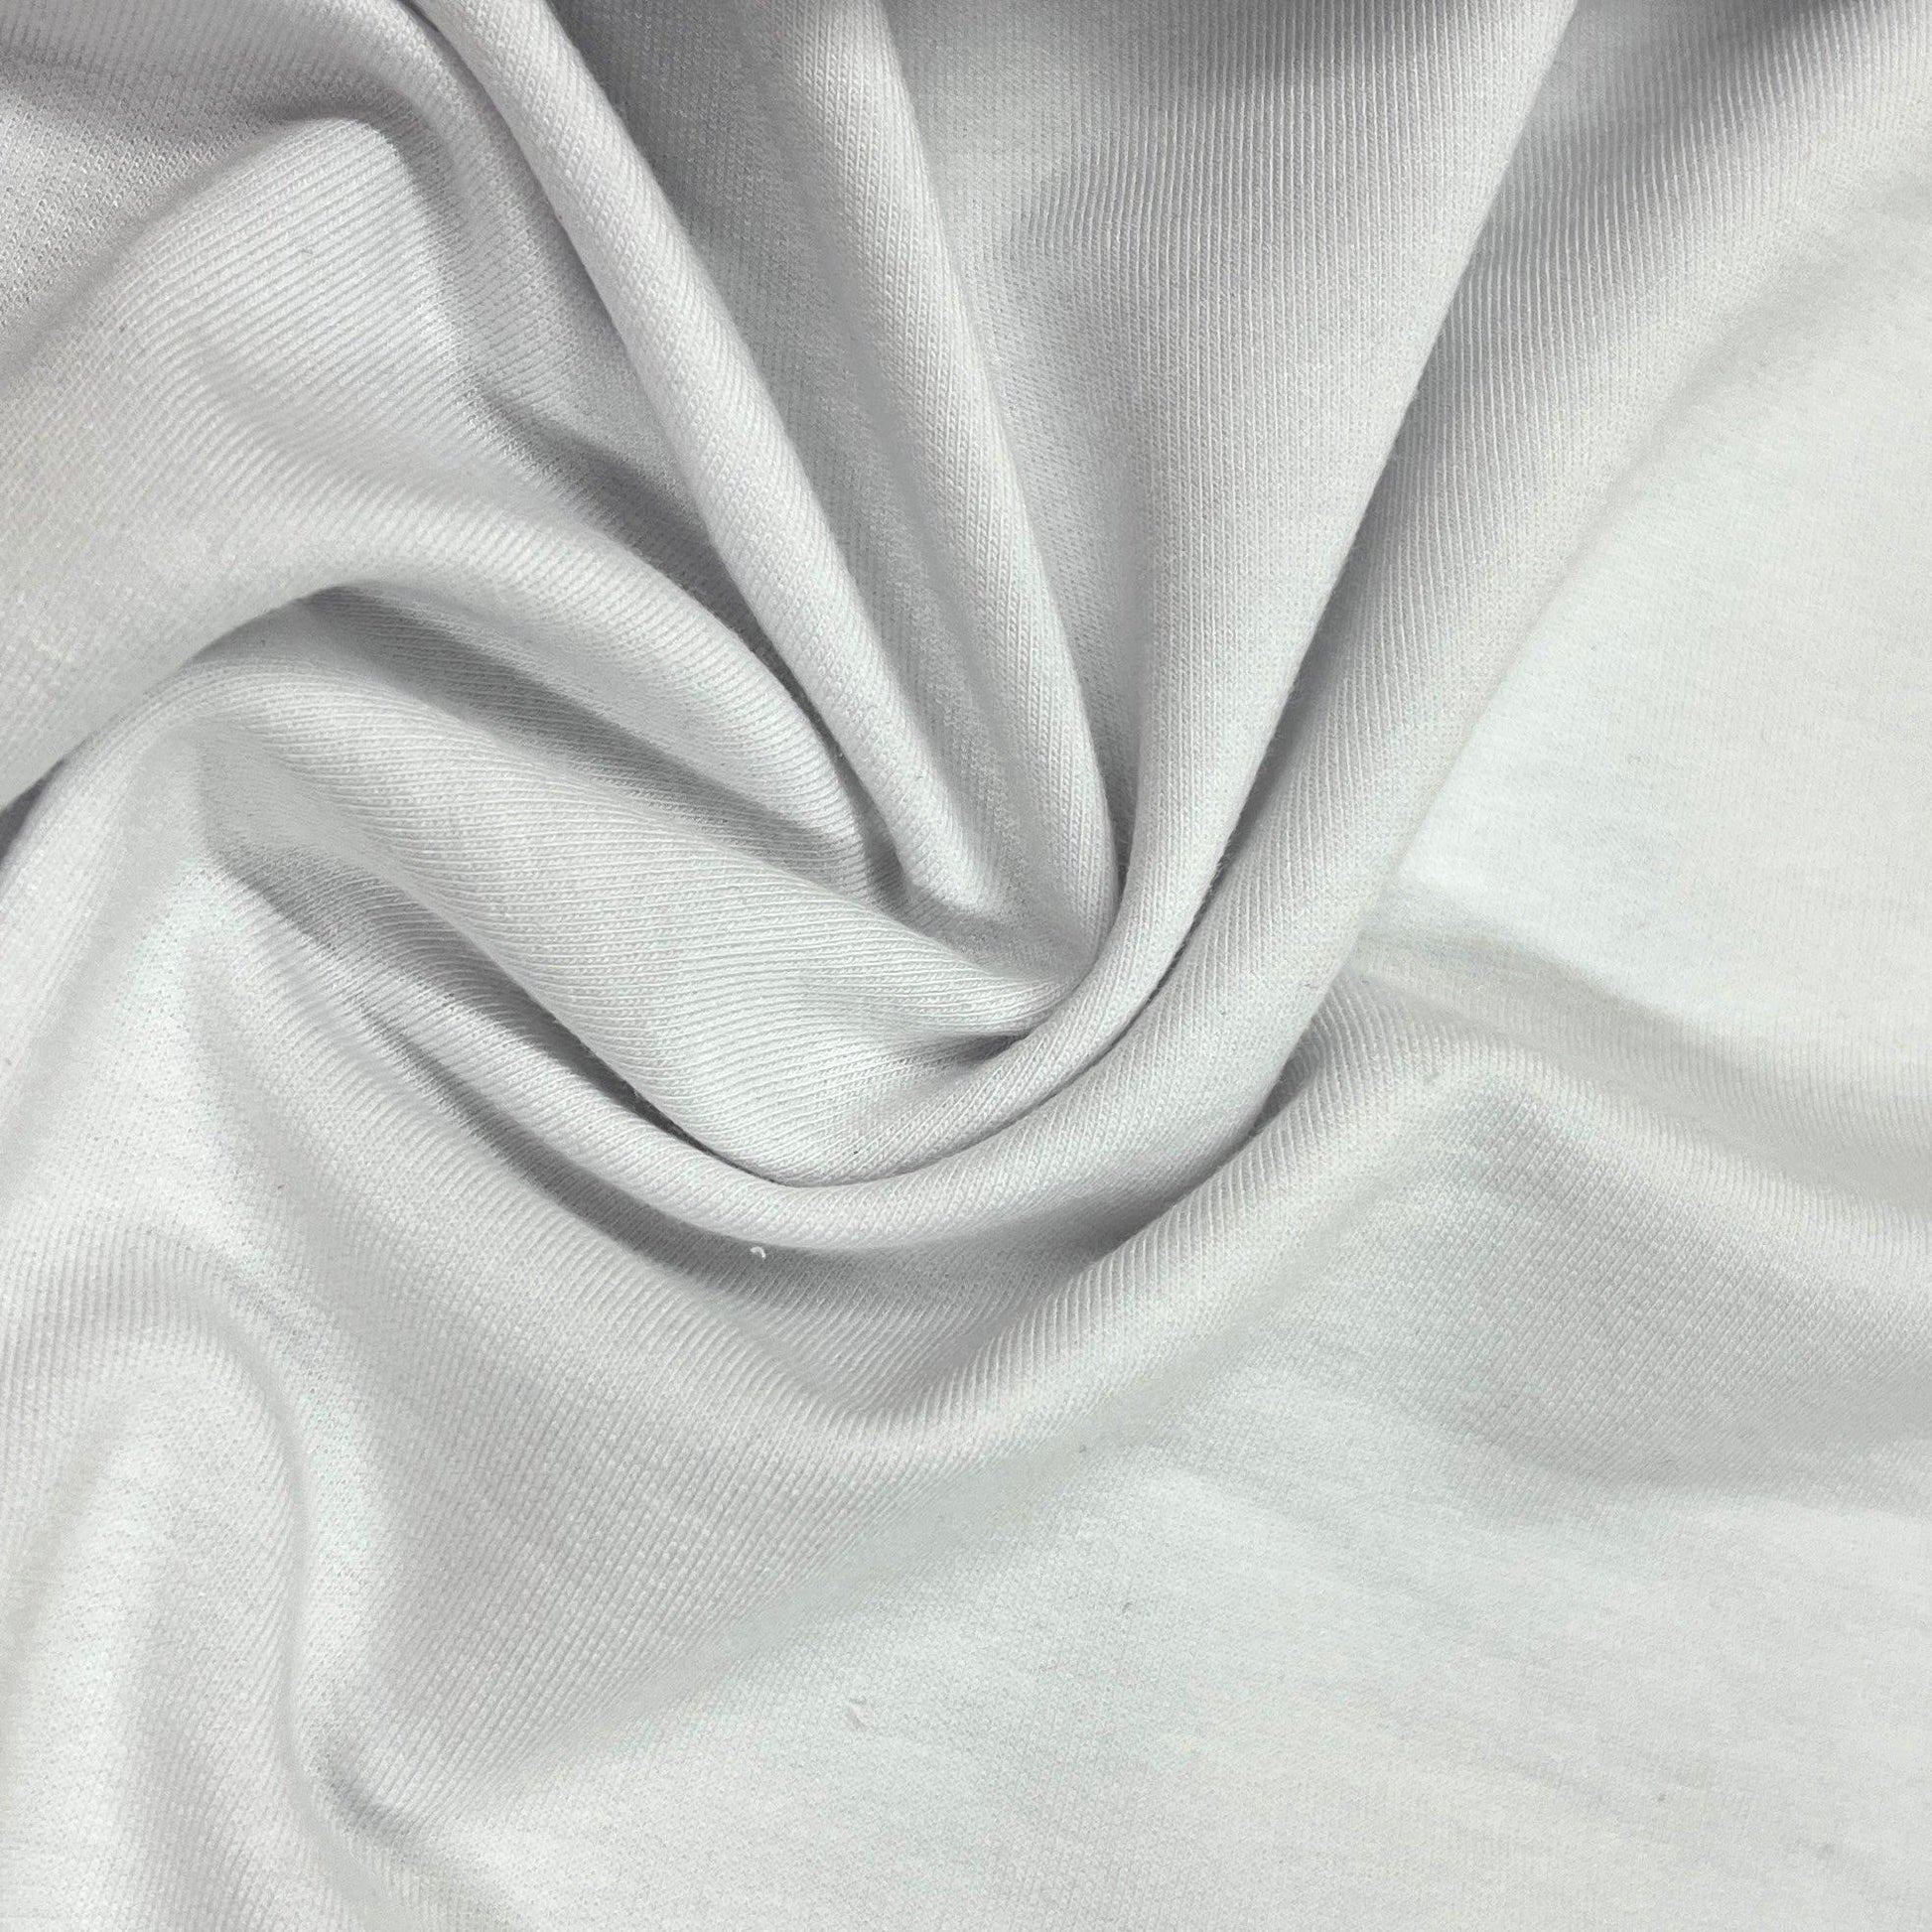 White Bamboo Stretch French Terry Fabric - 380 GSM - Knit in the USA, $12.50/yd - Rolls - Nature's Fabrics